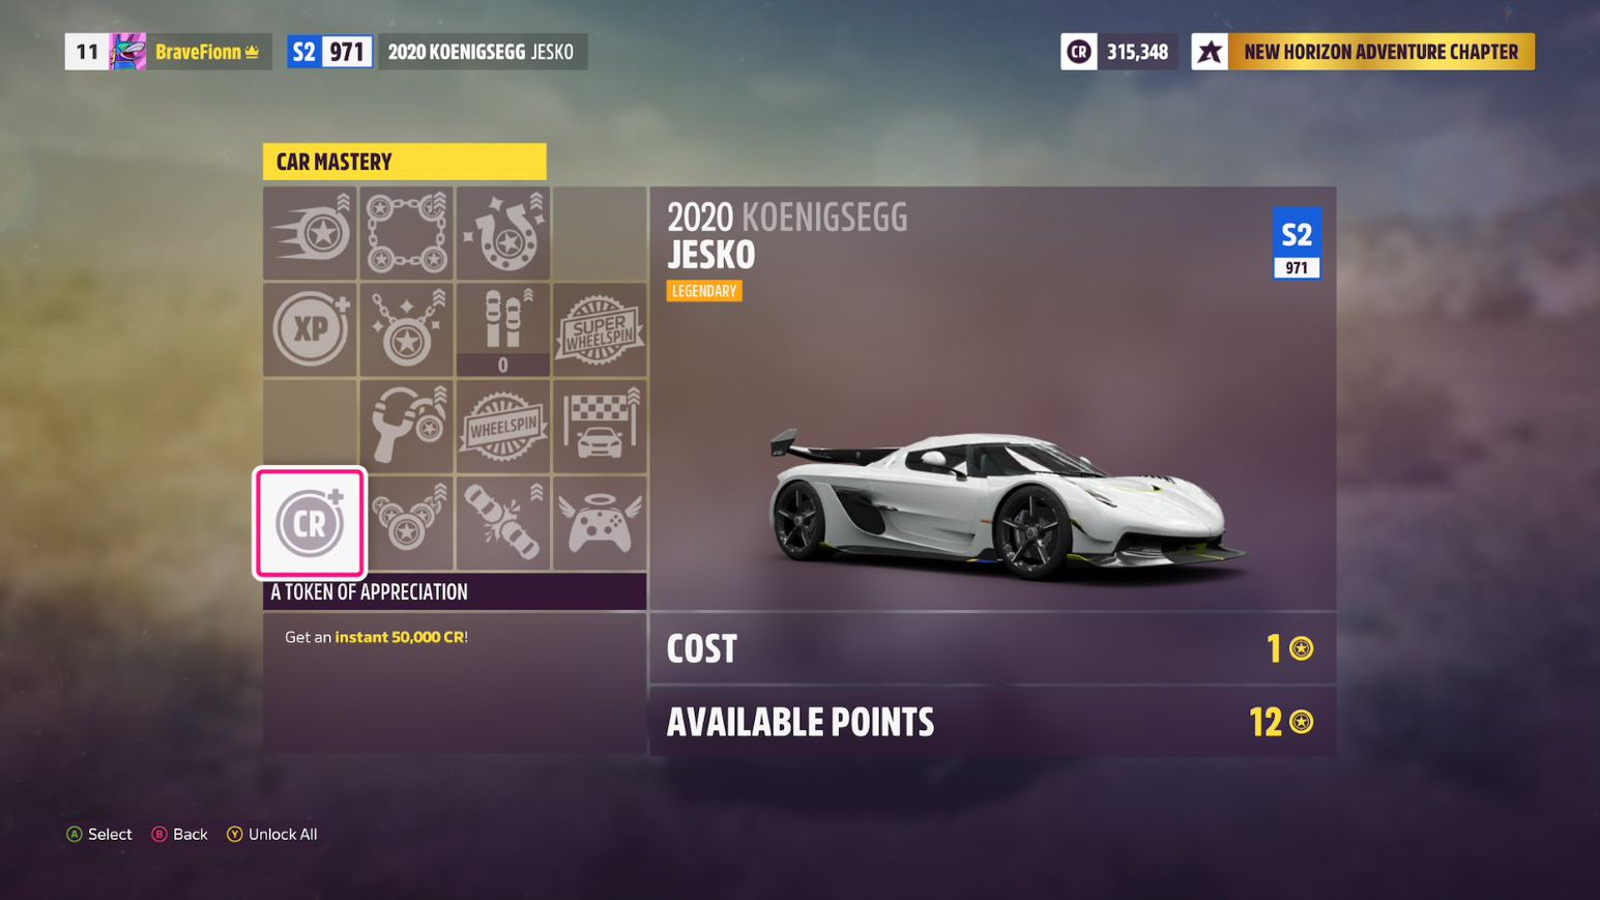 Supercar Race Clicker Codes - Try Hard Guides